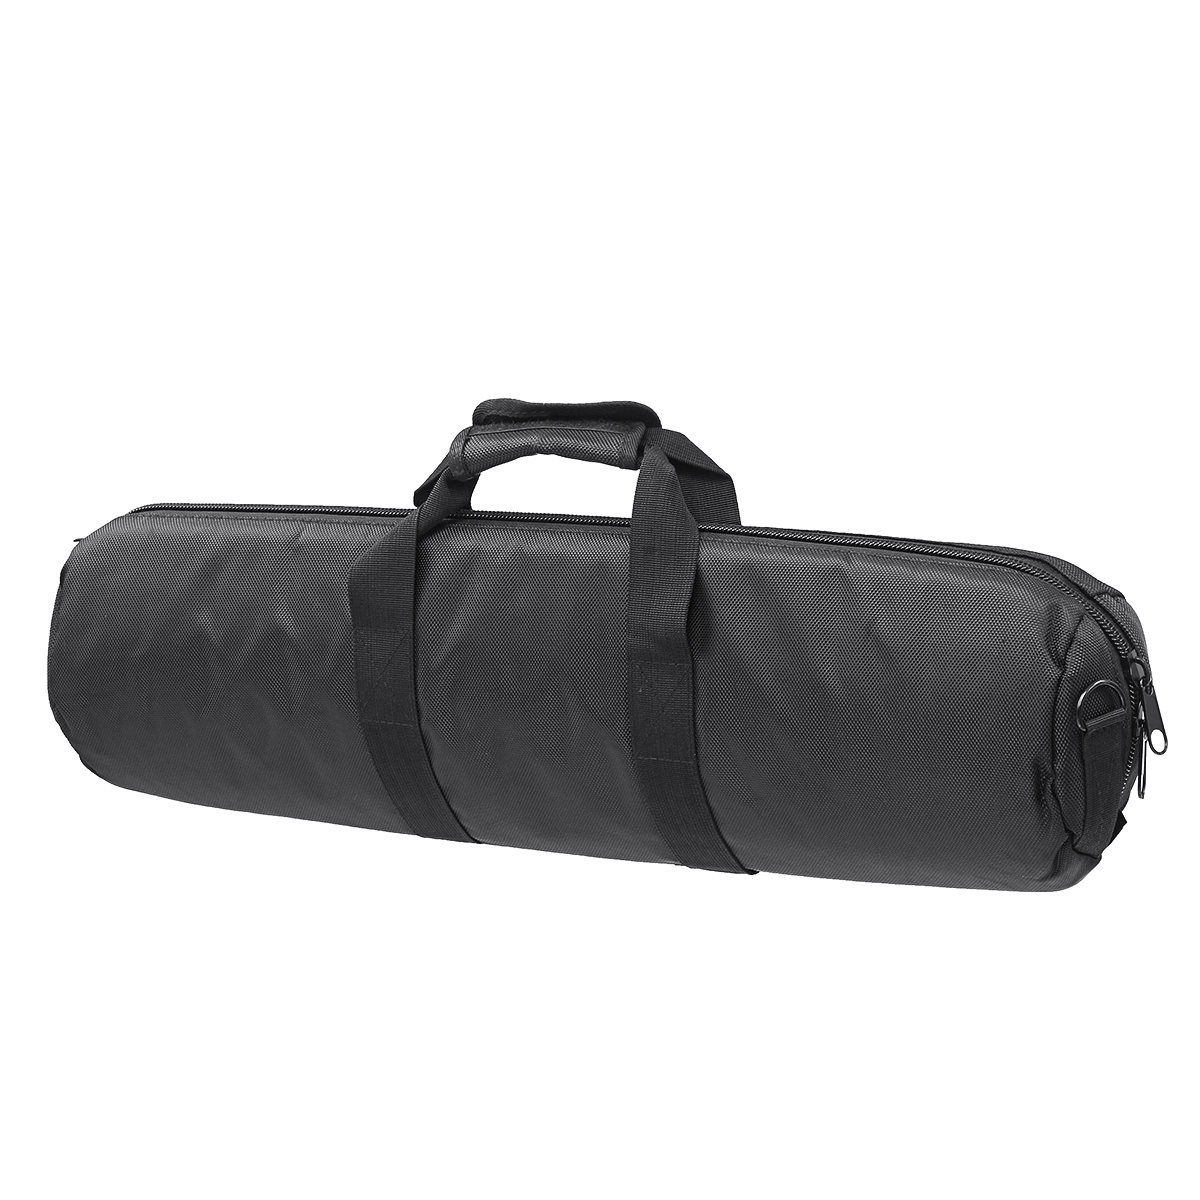 607080cm-Camera-Tripod-Storage-Bag-Travel-Carry-Case-Photography-Accessories-1526351-1